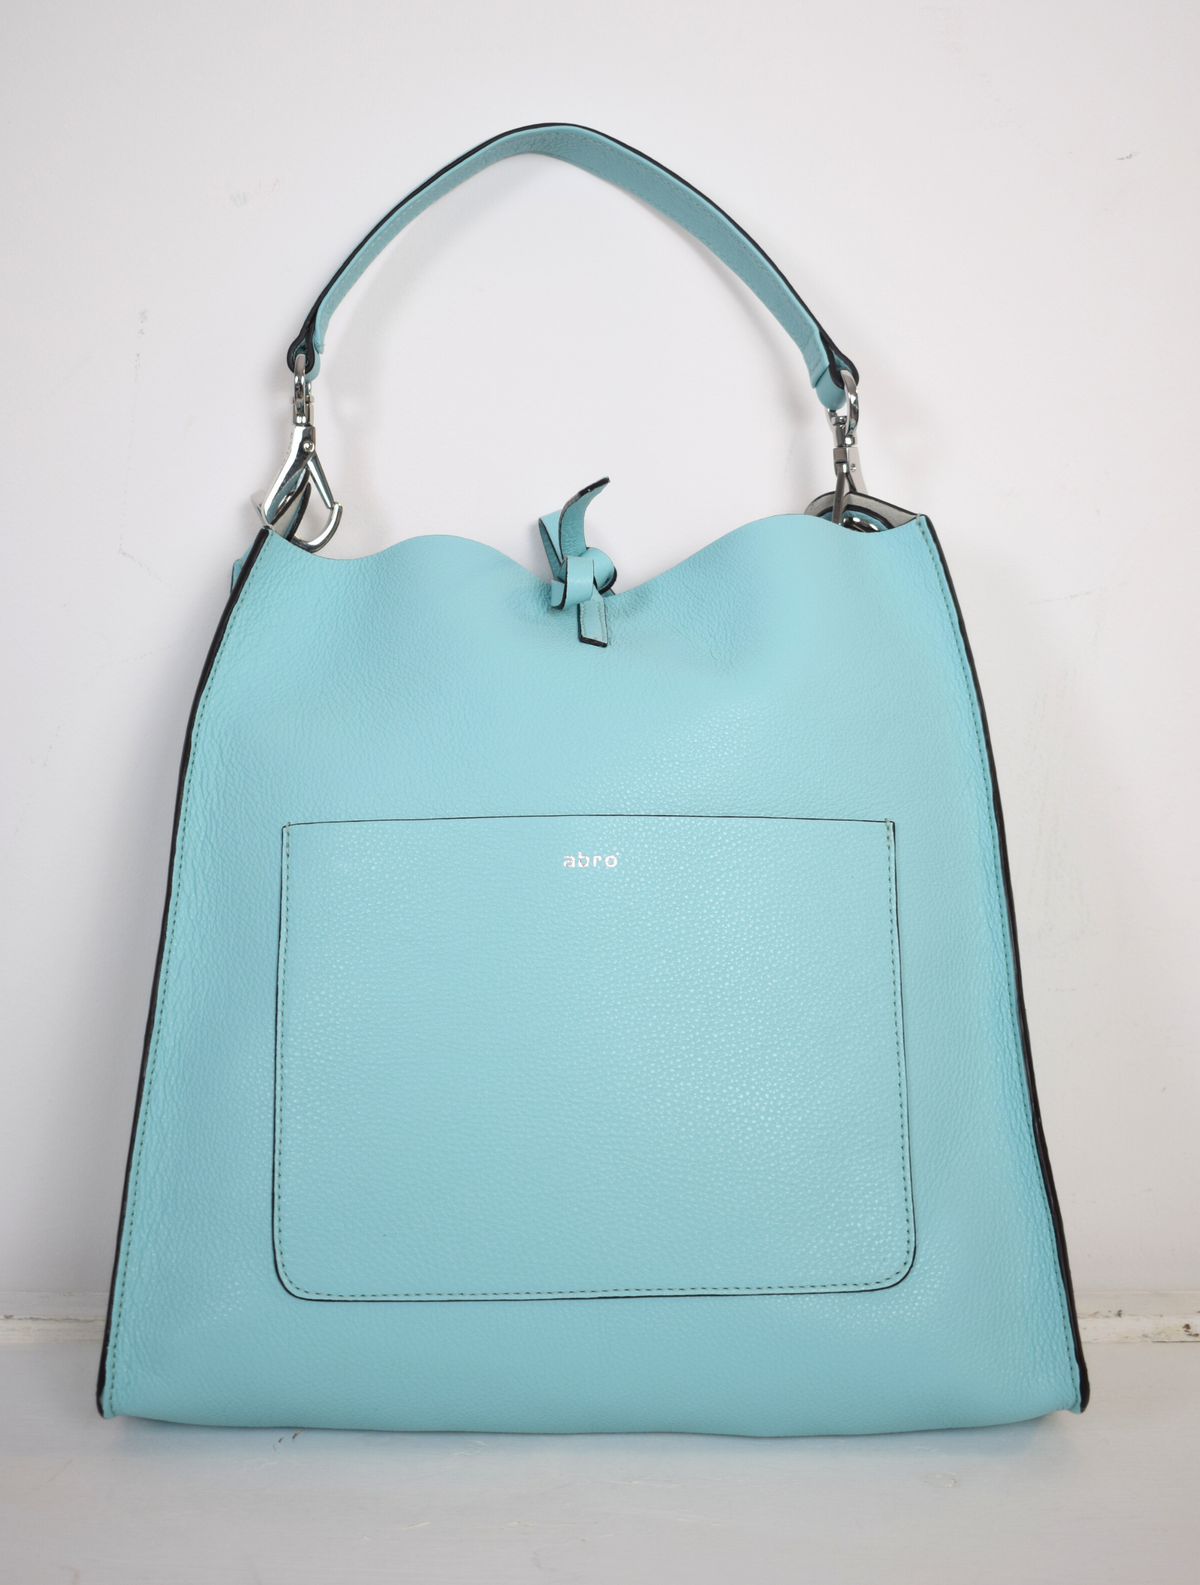 Pale blue leather bag. With a handle and a cross body strap.